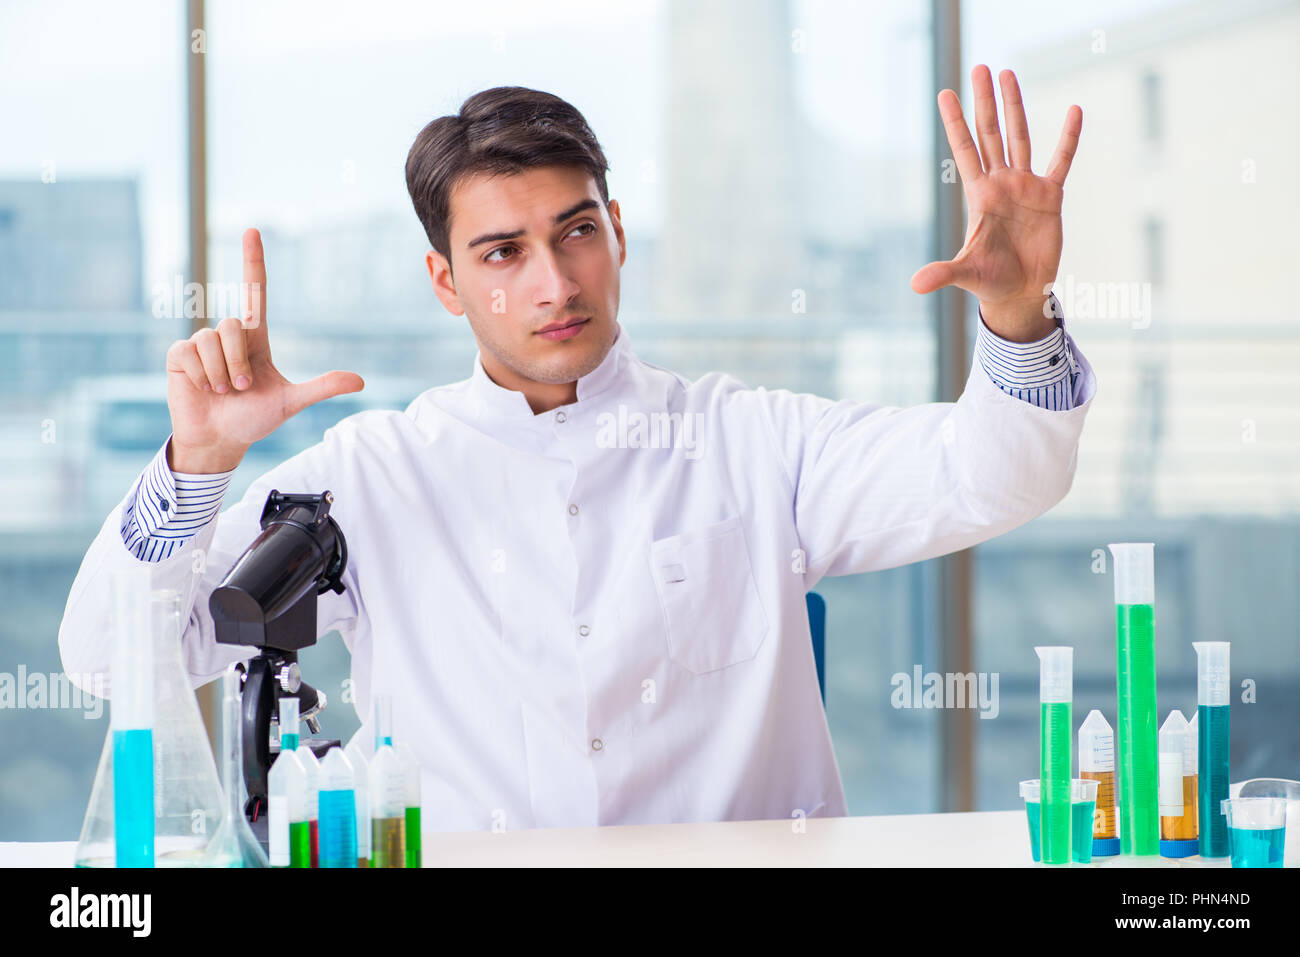 Young chemist pressing virtual buttons in lab Stock Photo